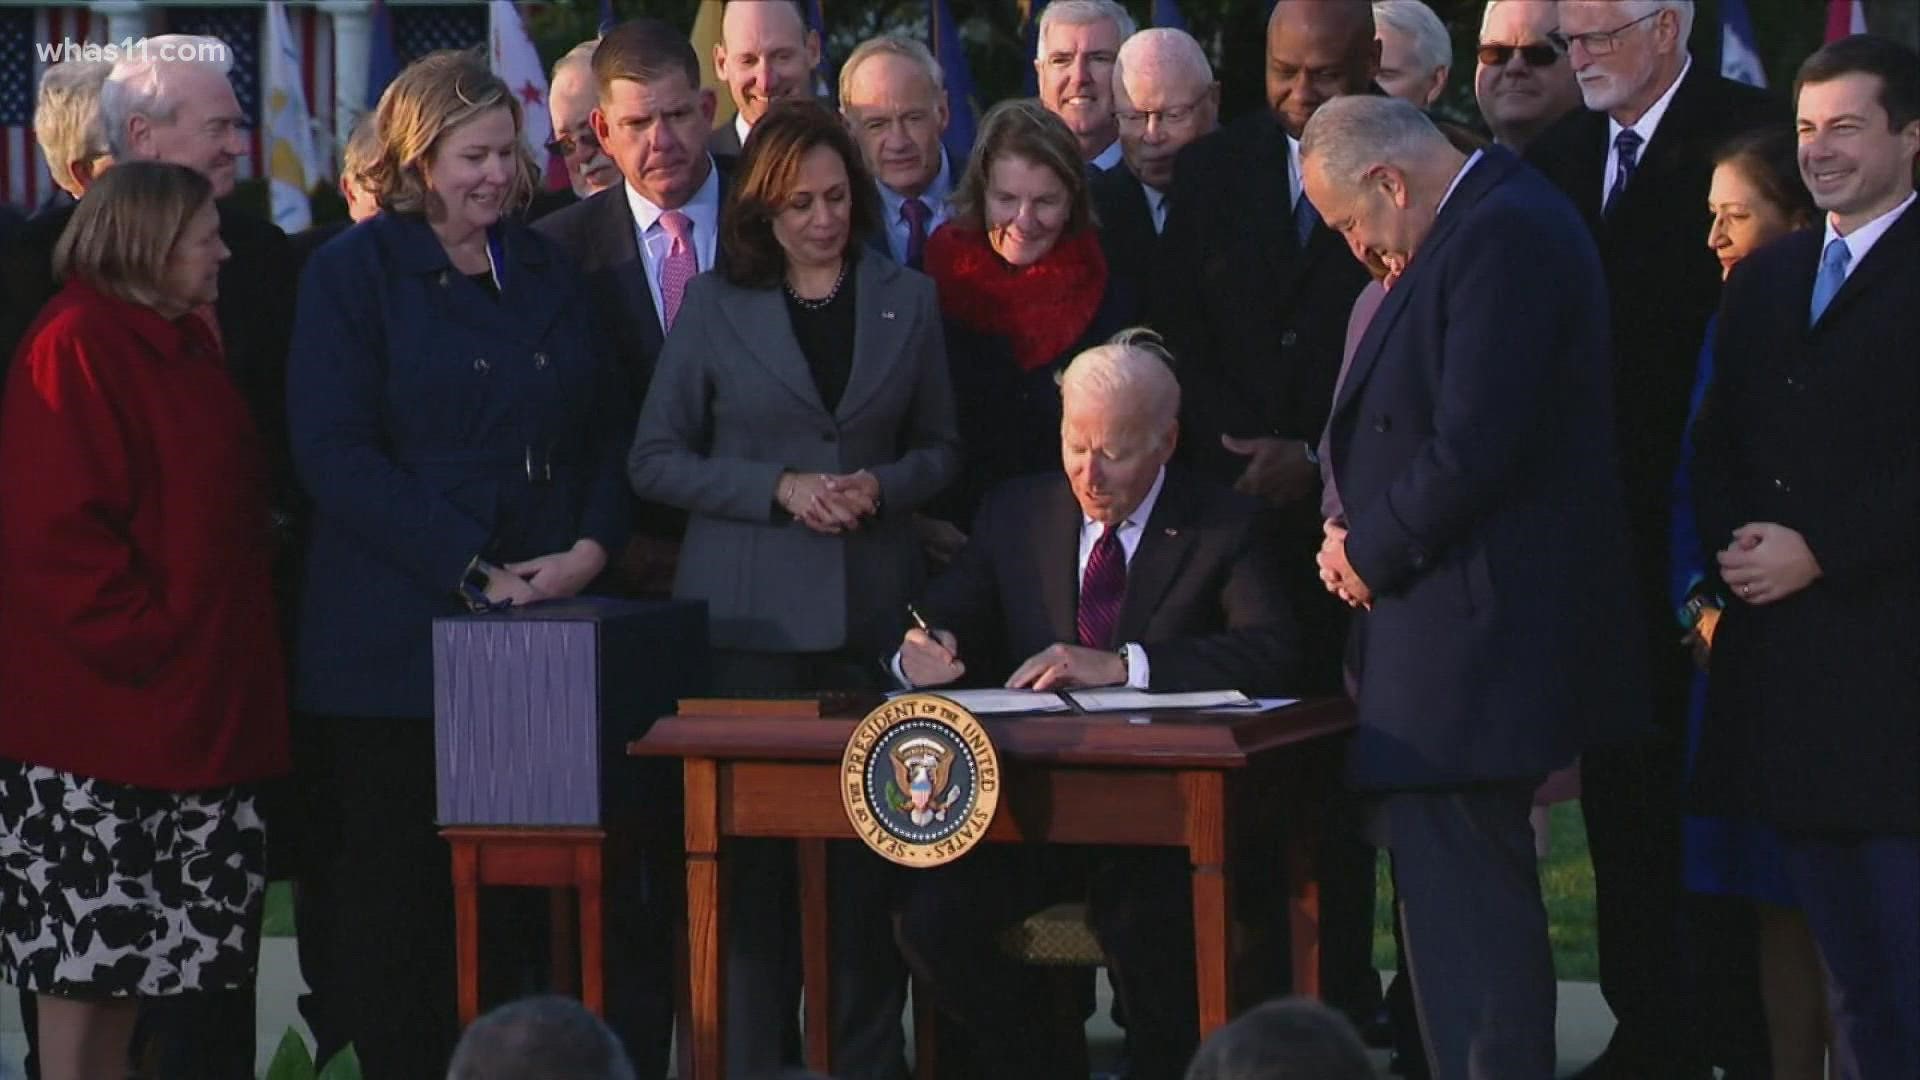 President Joe Biden signed his $1 trillion infrastructure deal into law Monday on the White House lawn, hailing it as an example of what bipartisanship can achieve.